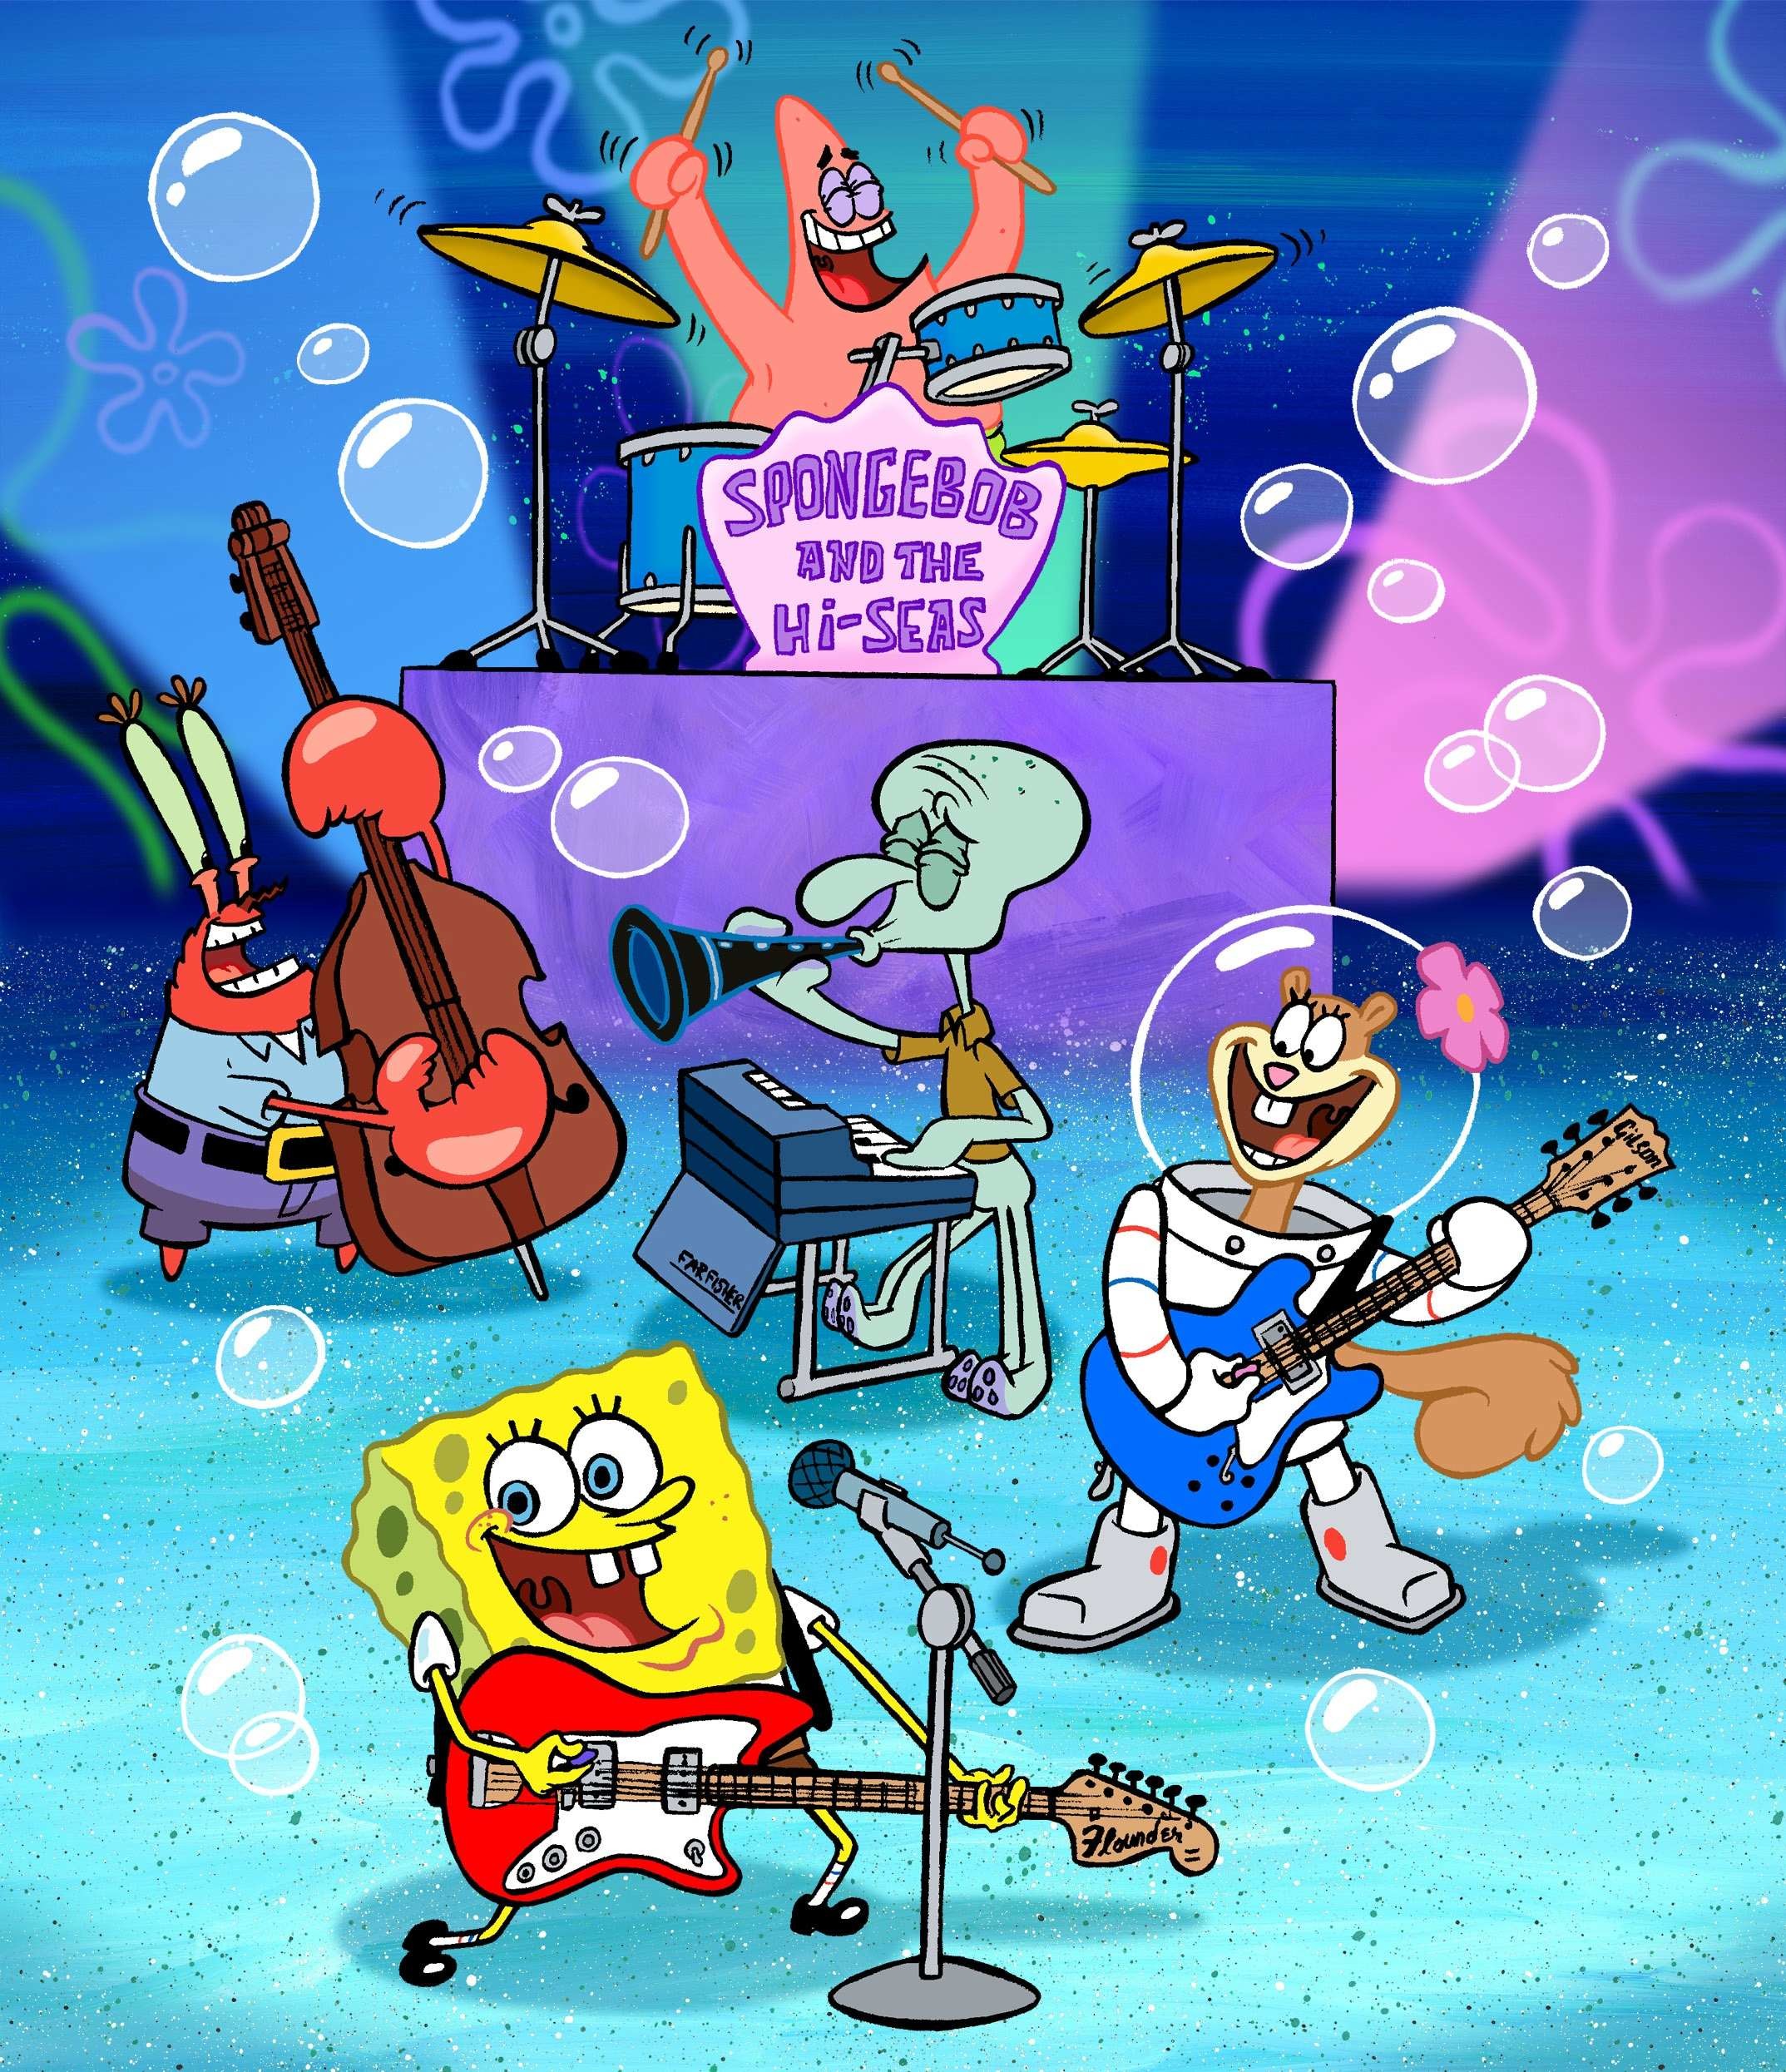 2147x2491 happy excited spongebob squarepants exciting patrick star trending #GIF on  #Giphy via #IFTTT http://gph.is/1LRbBgb | GIF | Pinterest | Patrick star,  ...